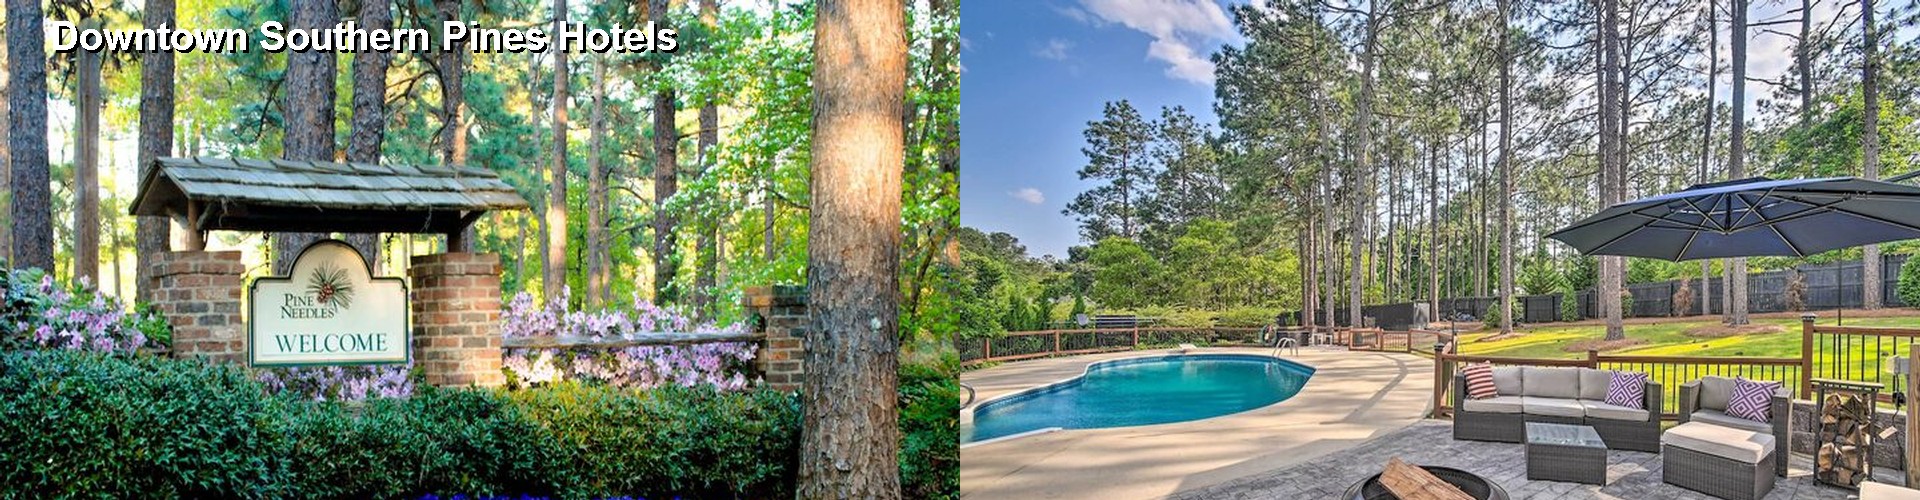 5 Best Hotels near Downtown Southern Pines